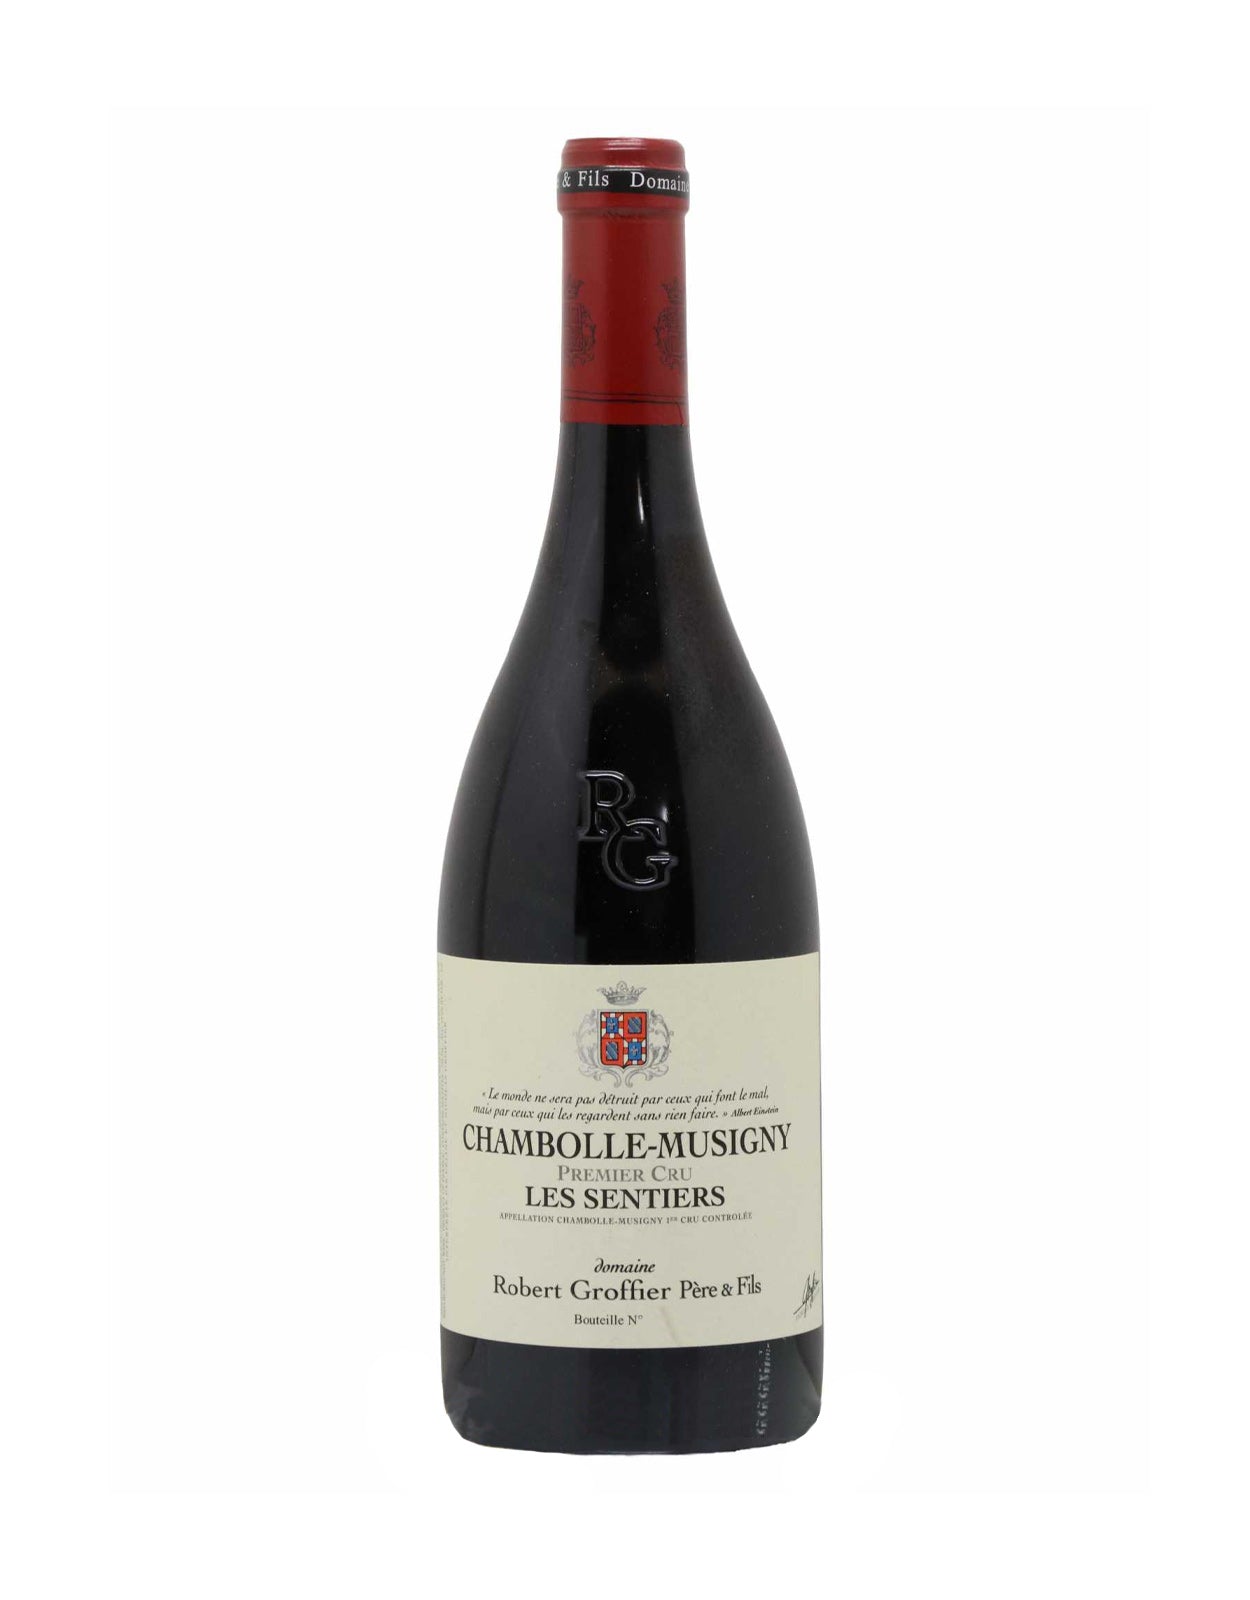 Robert Groffier Pere & Fils Chambolle Musigny Les Sentiers Premier Cru 2021